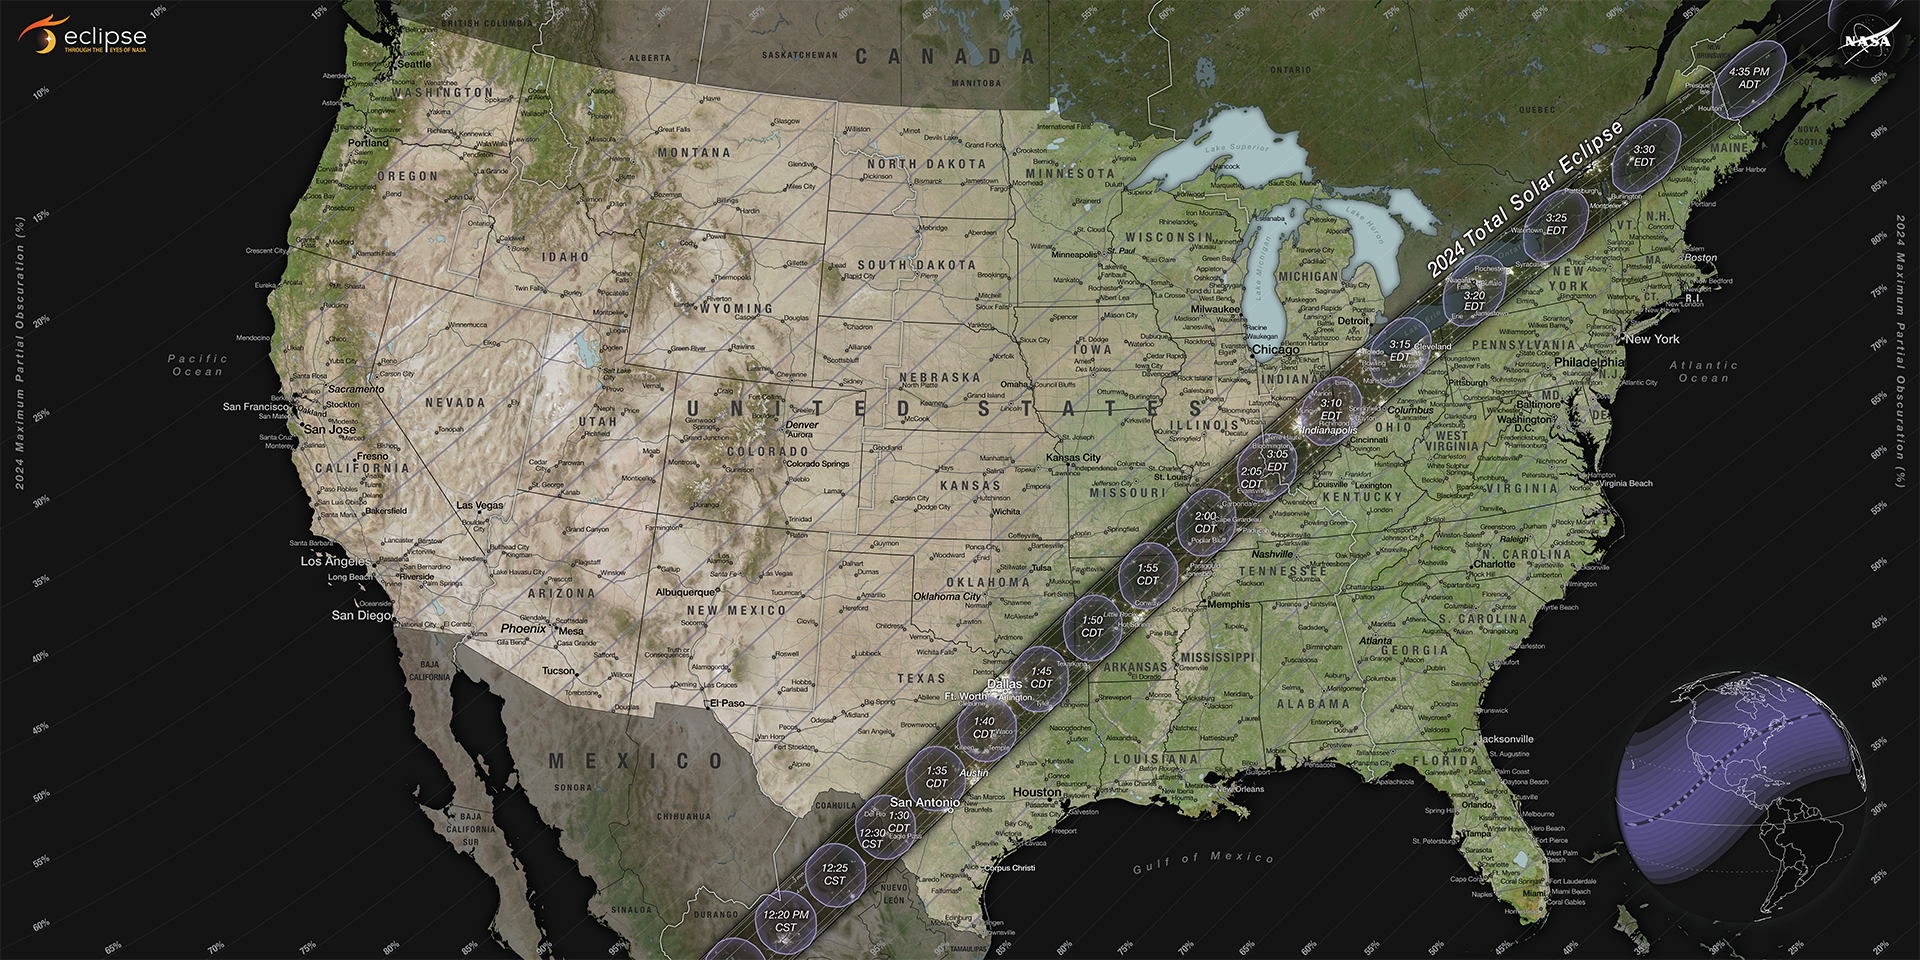 The April 8, 2024, solar eclipse will be visible in the entire contiguous United States, weather permitting